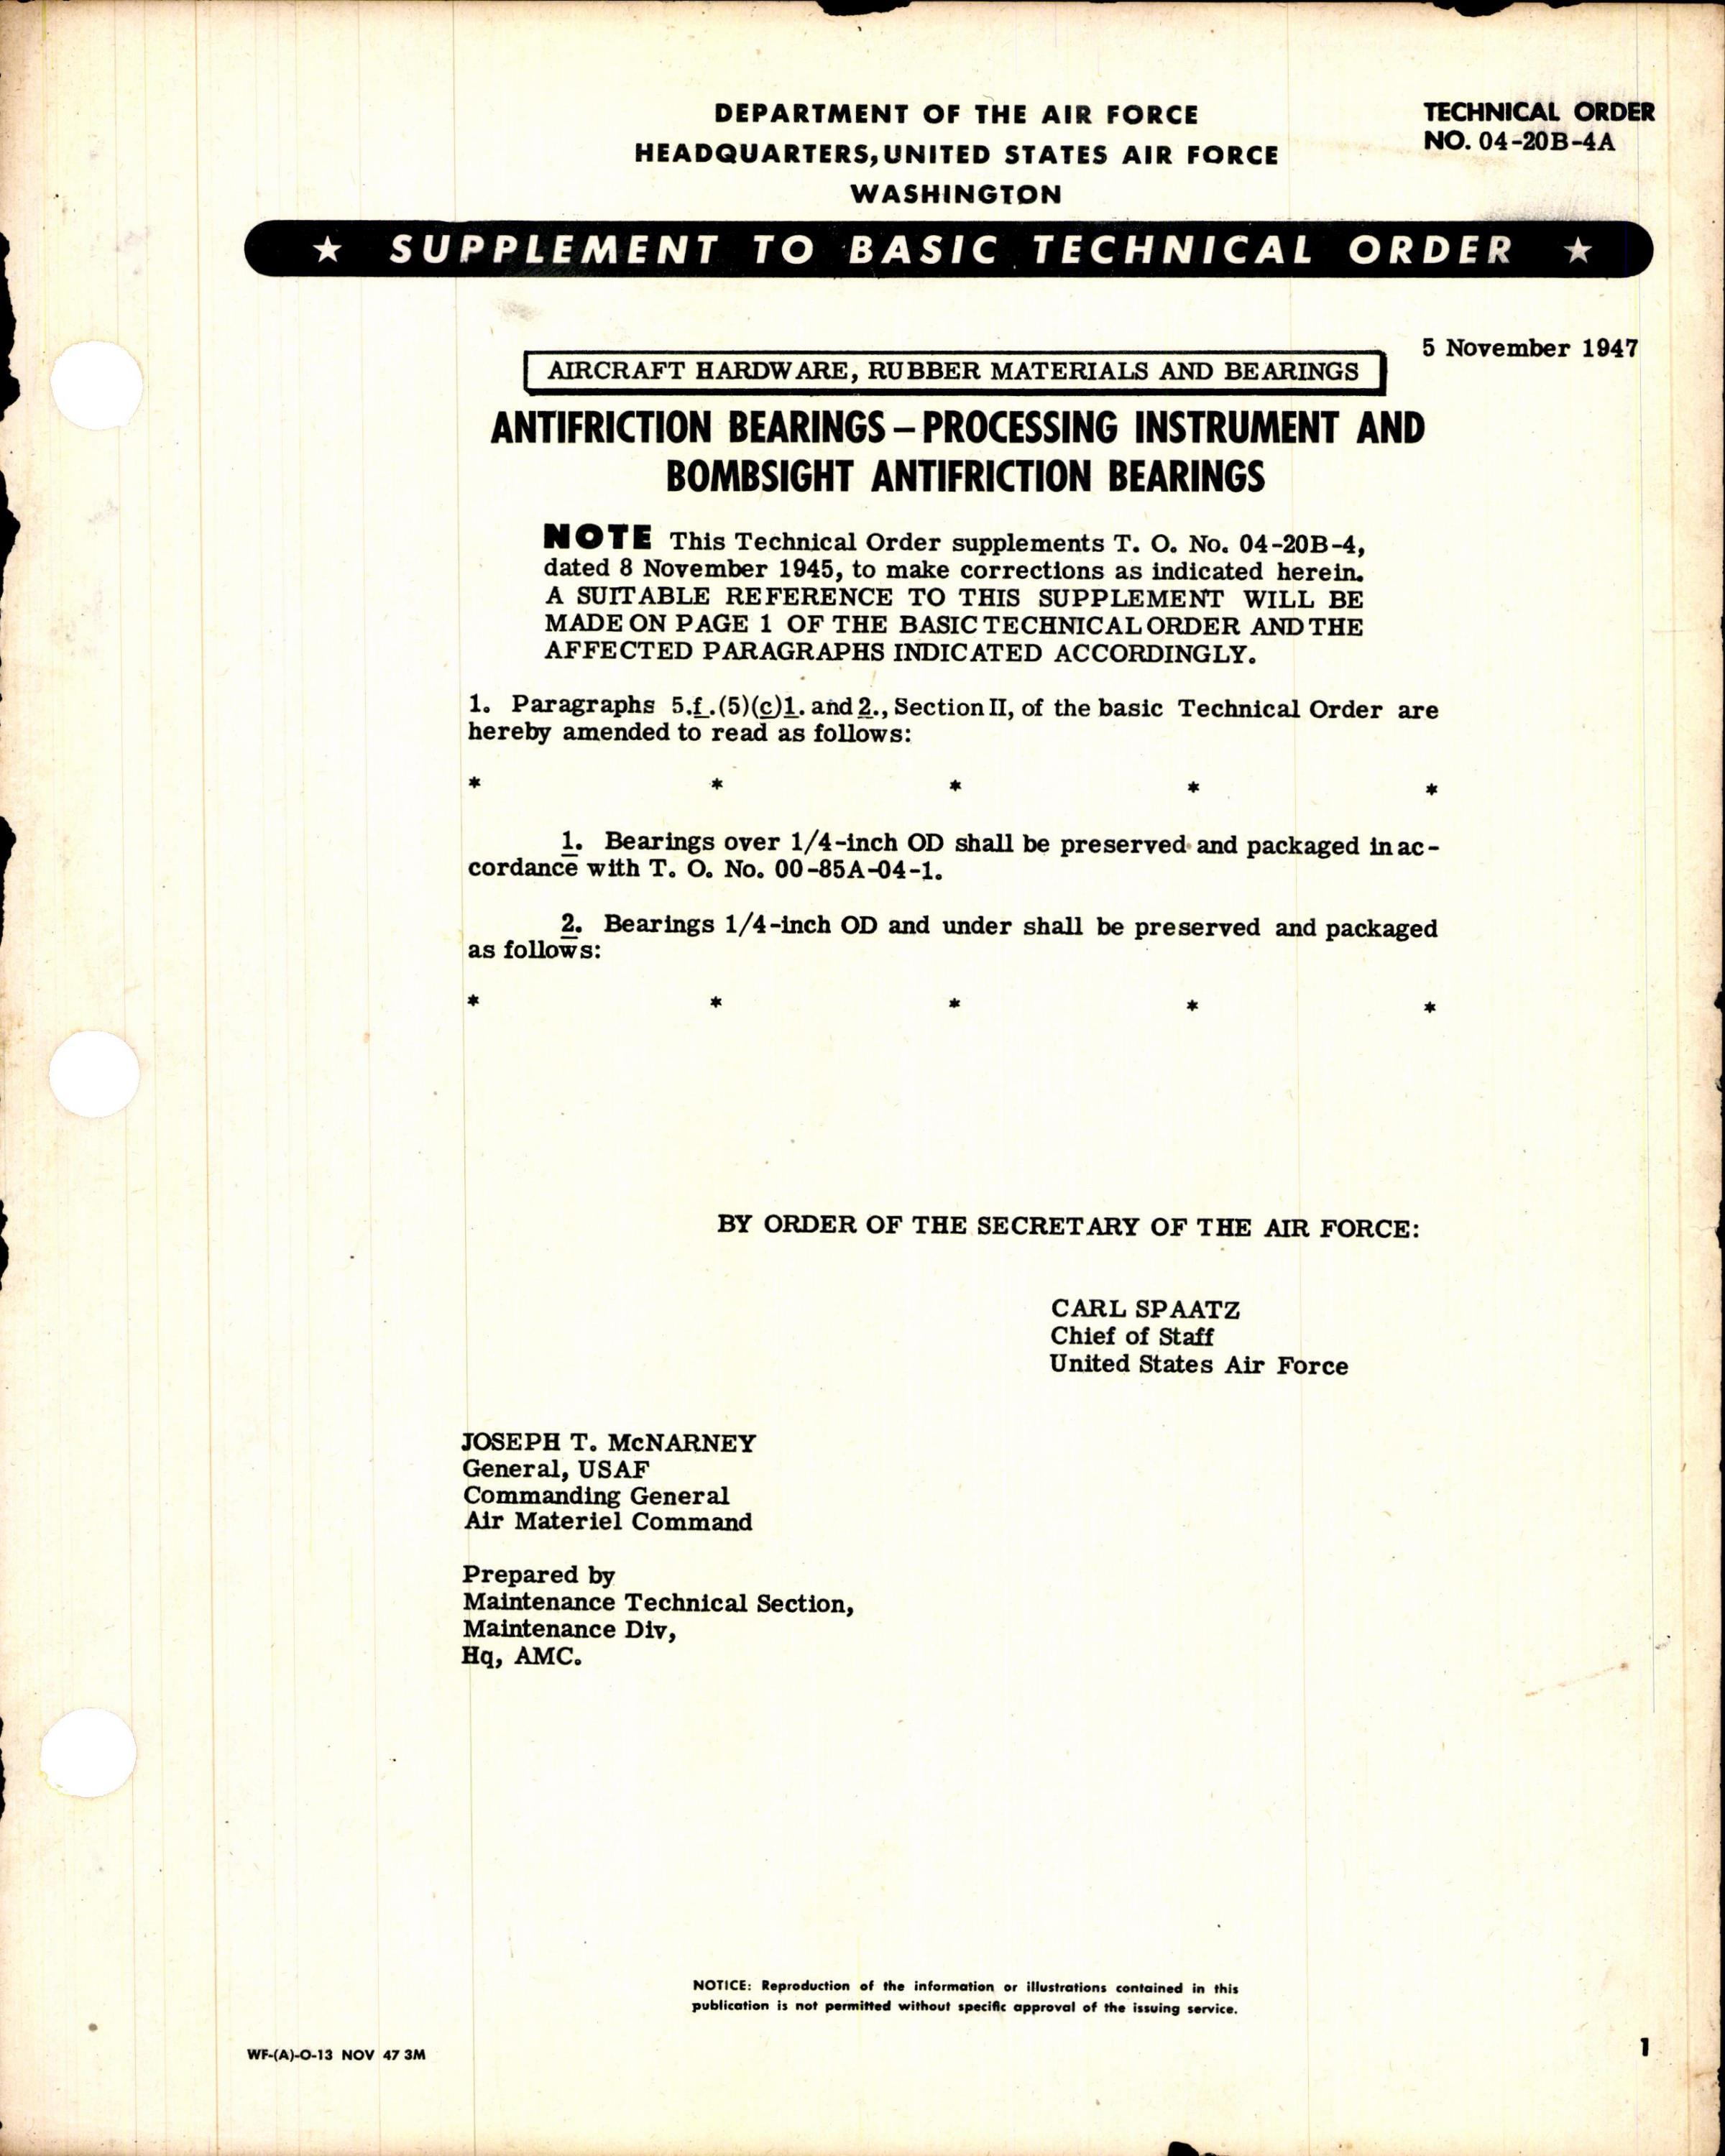 Sample page 1 from AirCorps Library document: Processing Instrument and Bombsight Antifriction Bearings